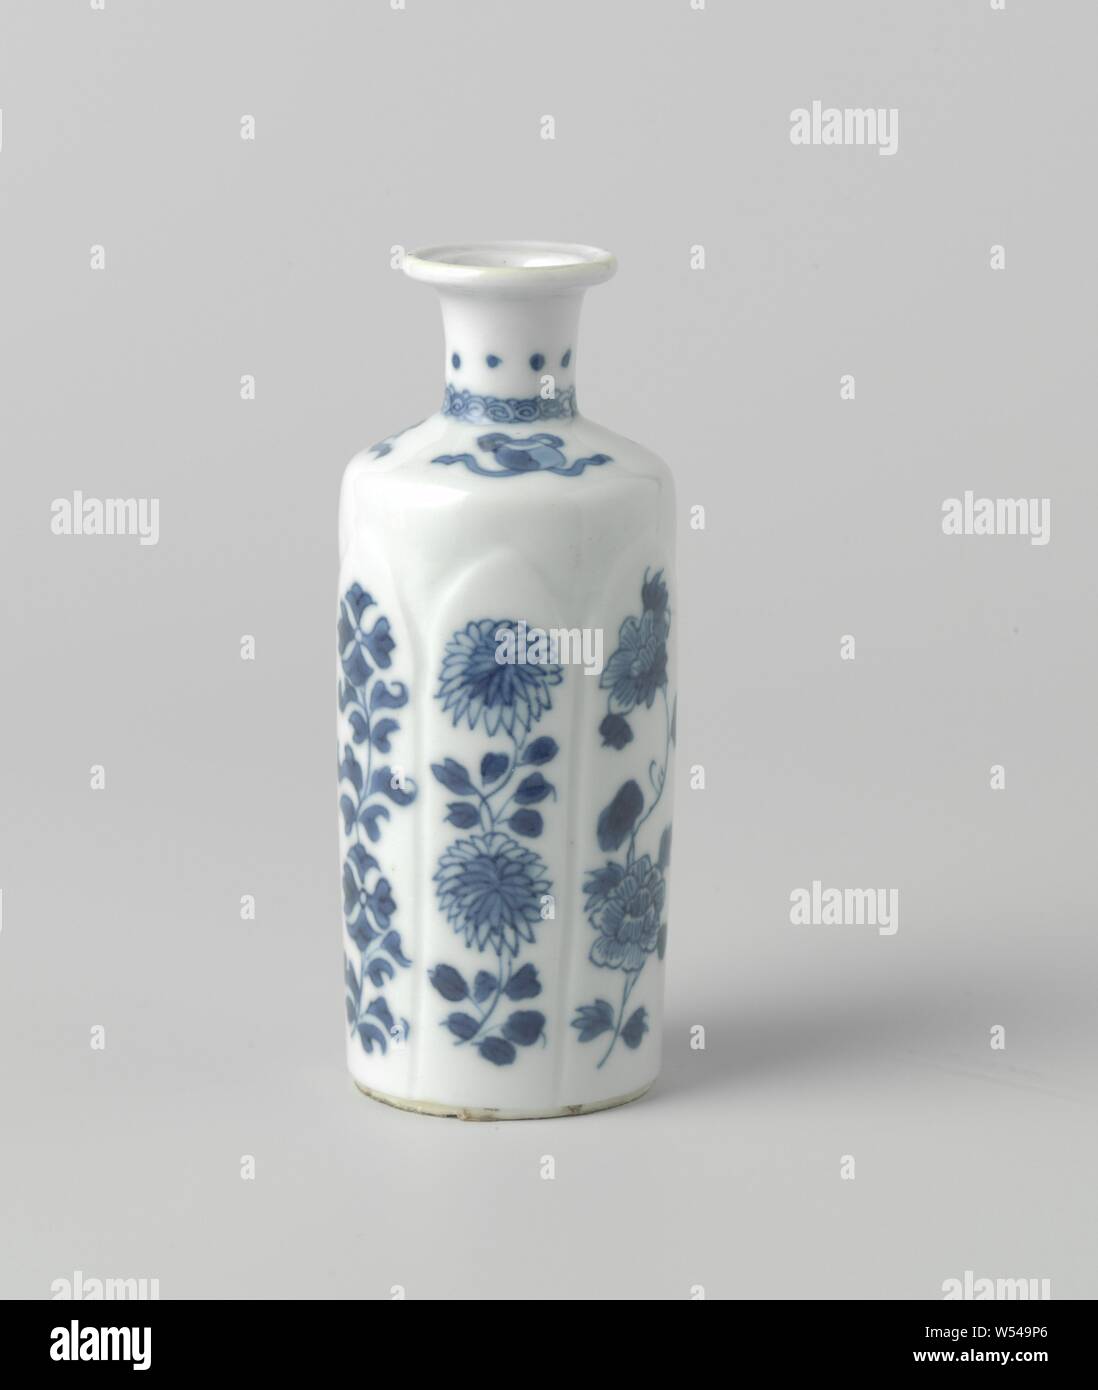 Cylindrical vase with flower sprays and precious objects, China, c. 1680 - c. 1720, Qing-dynasty (1644-1912) / Kangxi-period (1662-1722), porcelain, glaze, cobalt (mineral), vitrification, h 11.5 cm Stock Photo